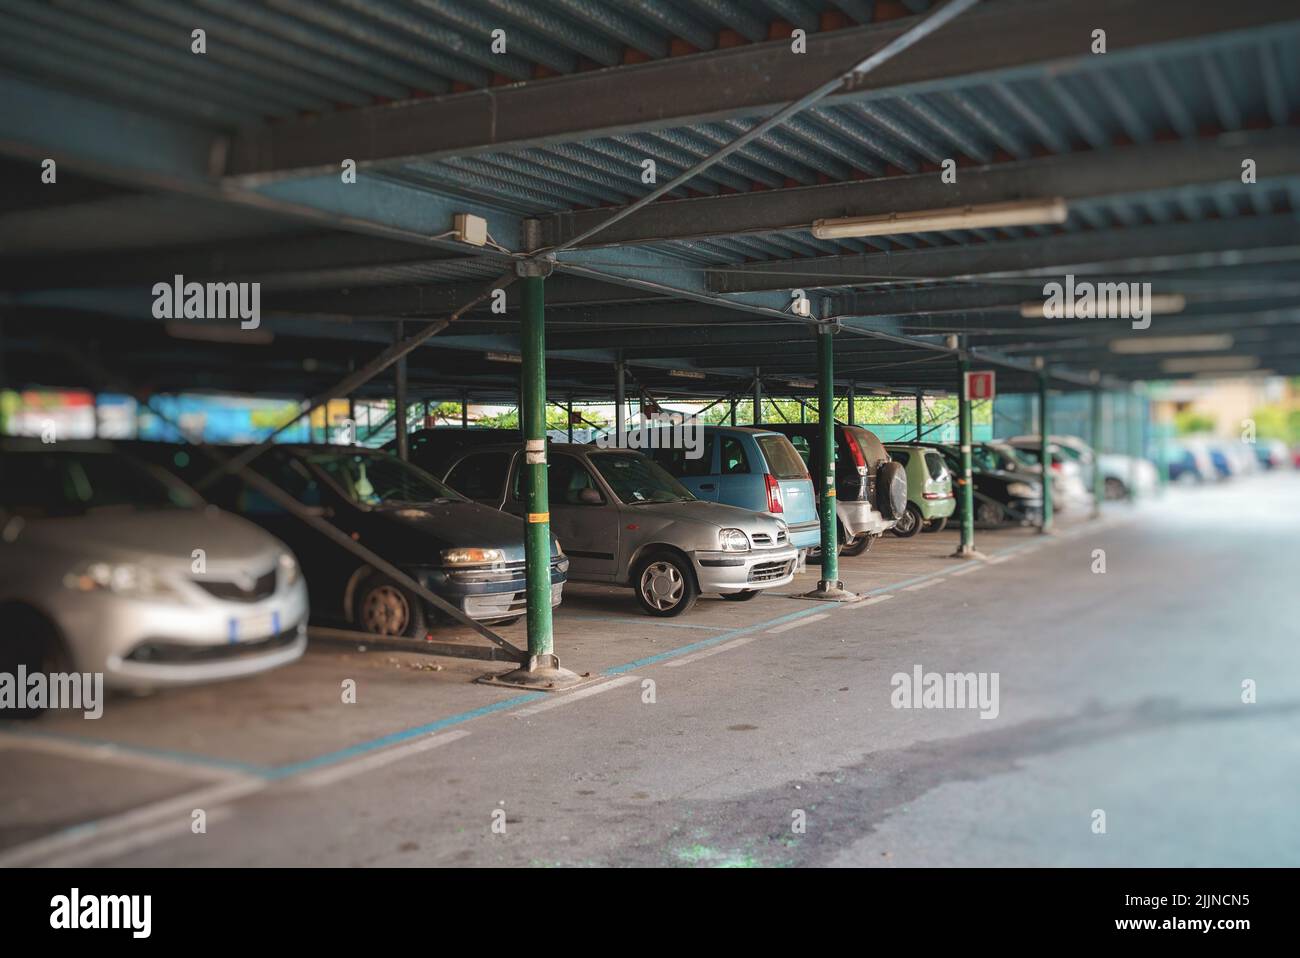 Two-level car parking in Italy. Stock Photo